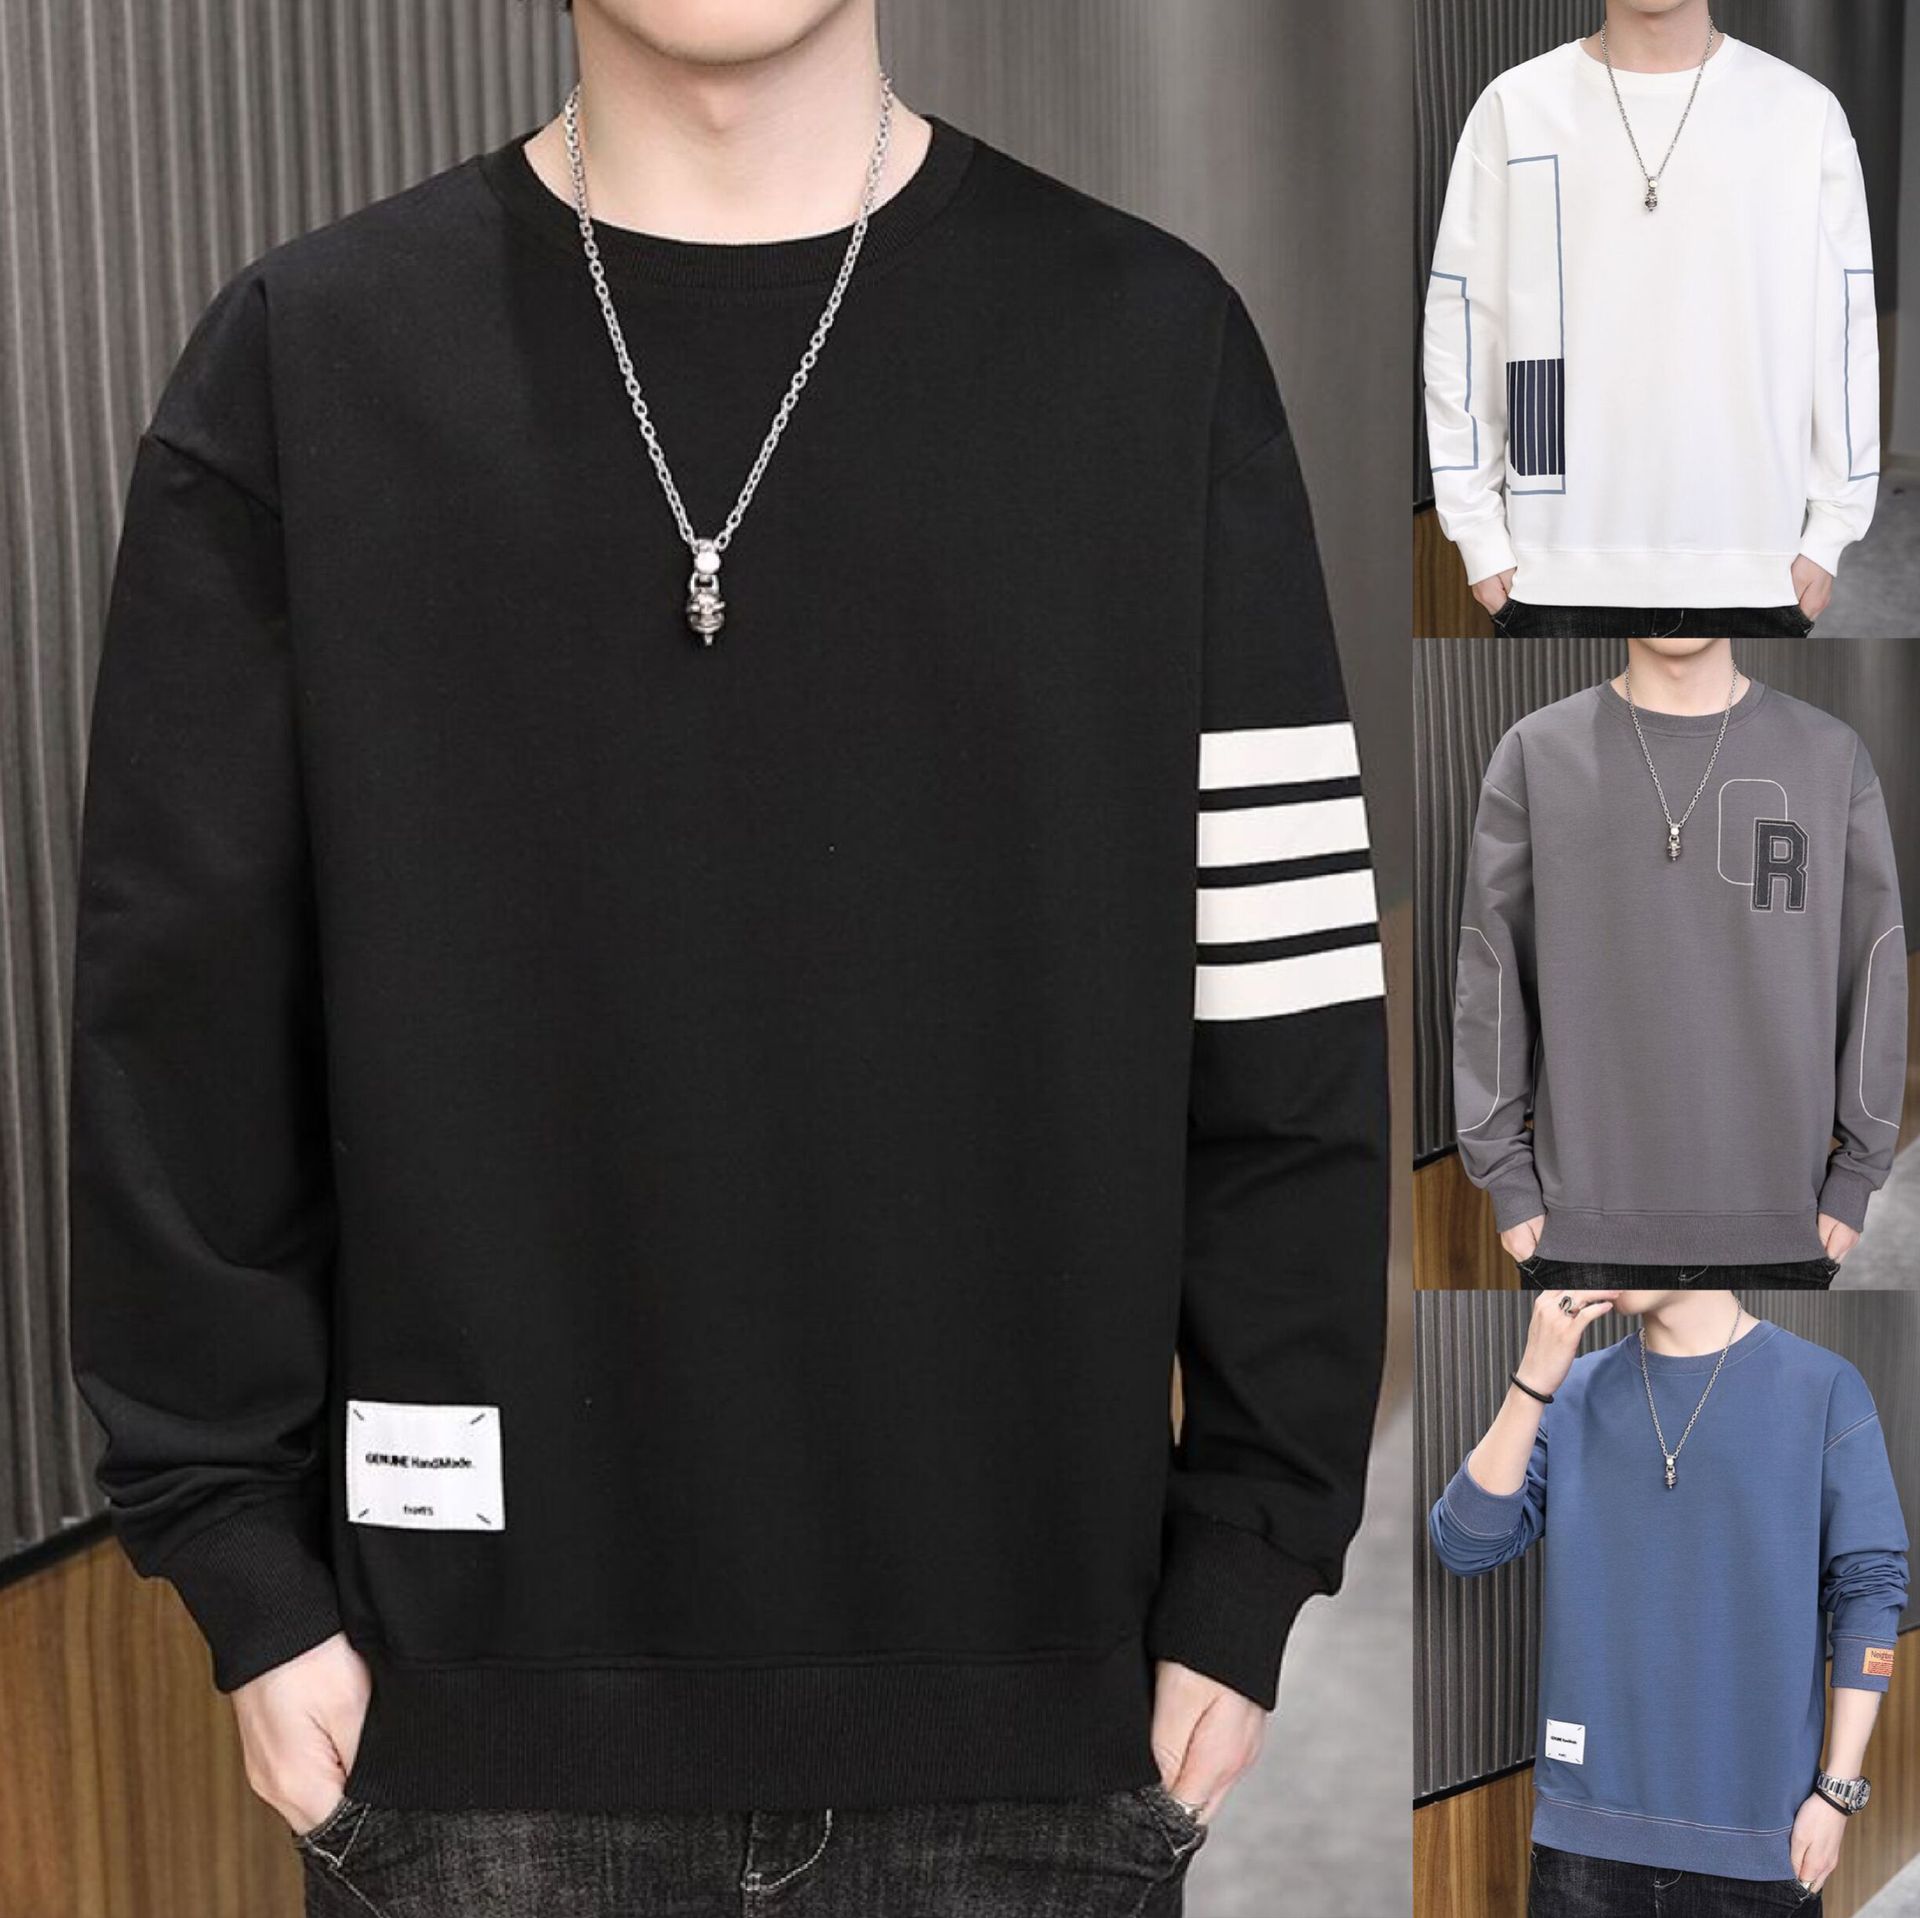 sweater men‘s spring and autumn new casual trend pu shuai youth men‘s clothing round neck top men‘s undershirt long sleeve t-shirt